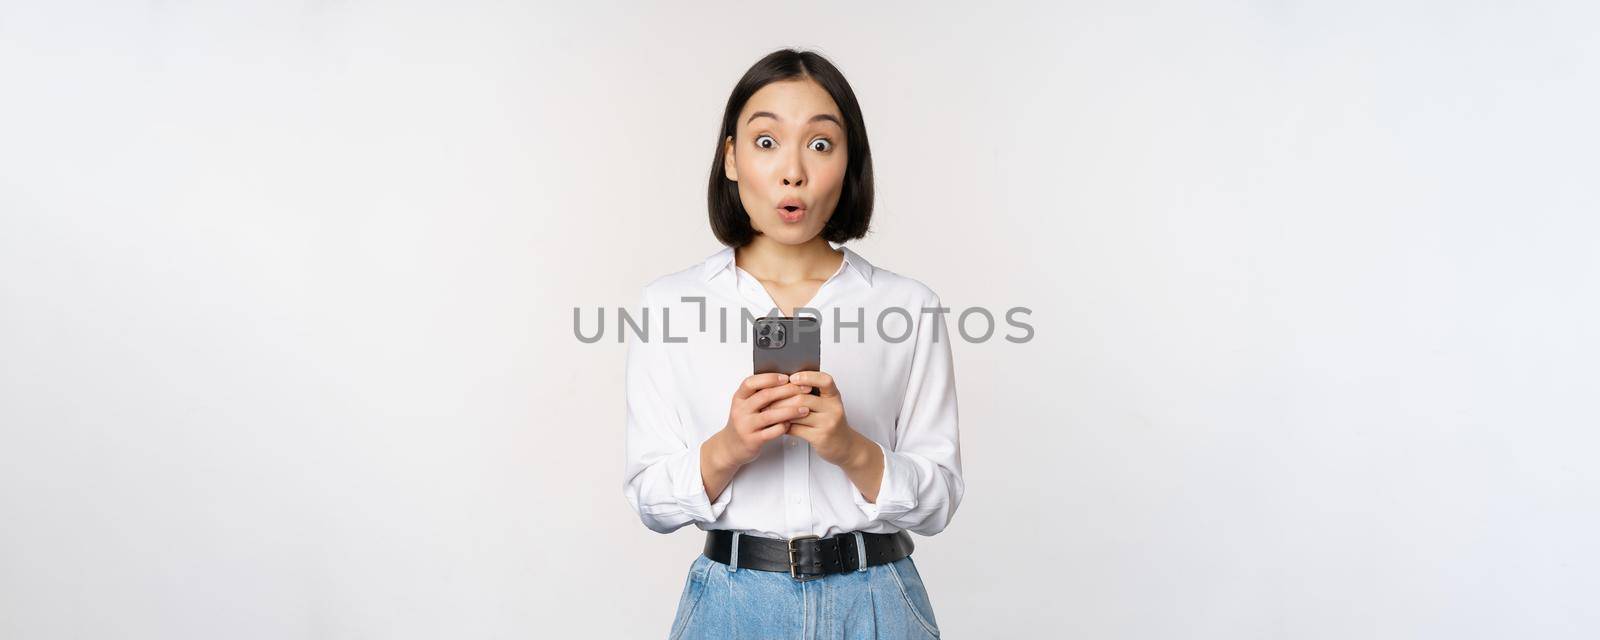 Technology concept. Portrait of asian woman with mobile phone, girl holding smartphone and reacting surprised at cellphone notification, app info, white background.